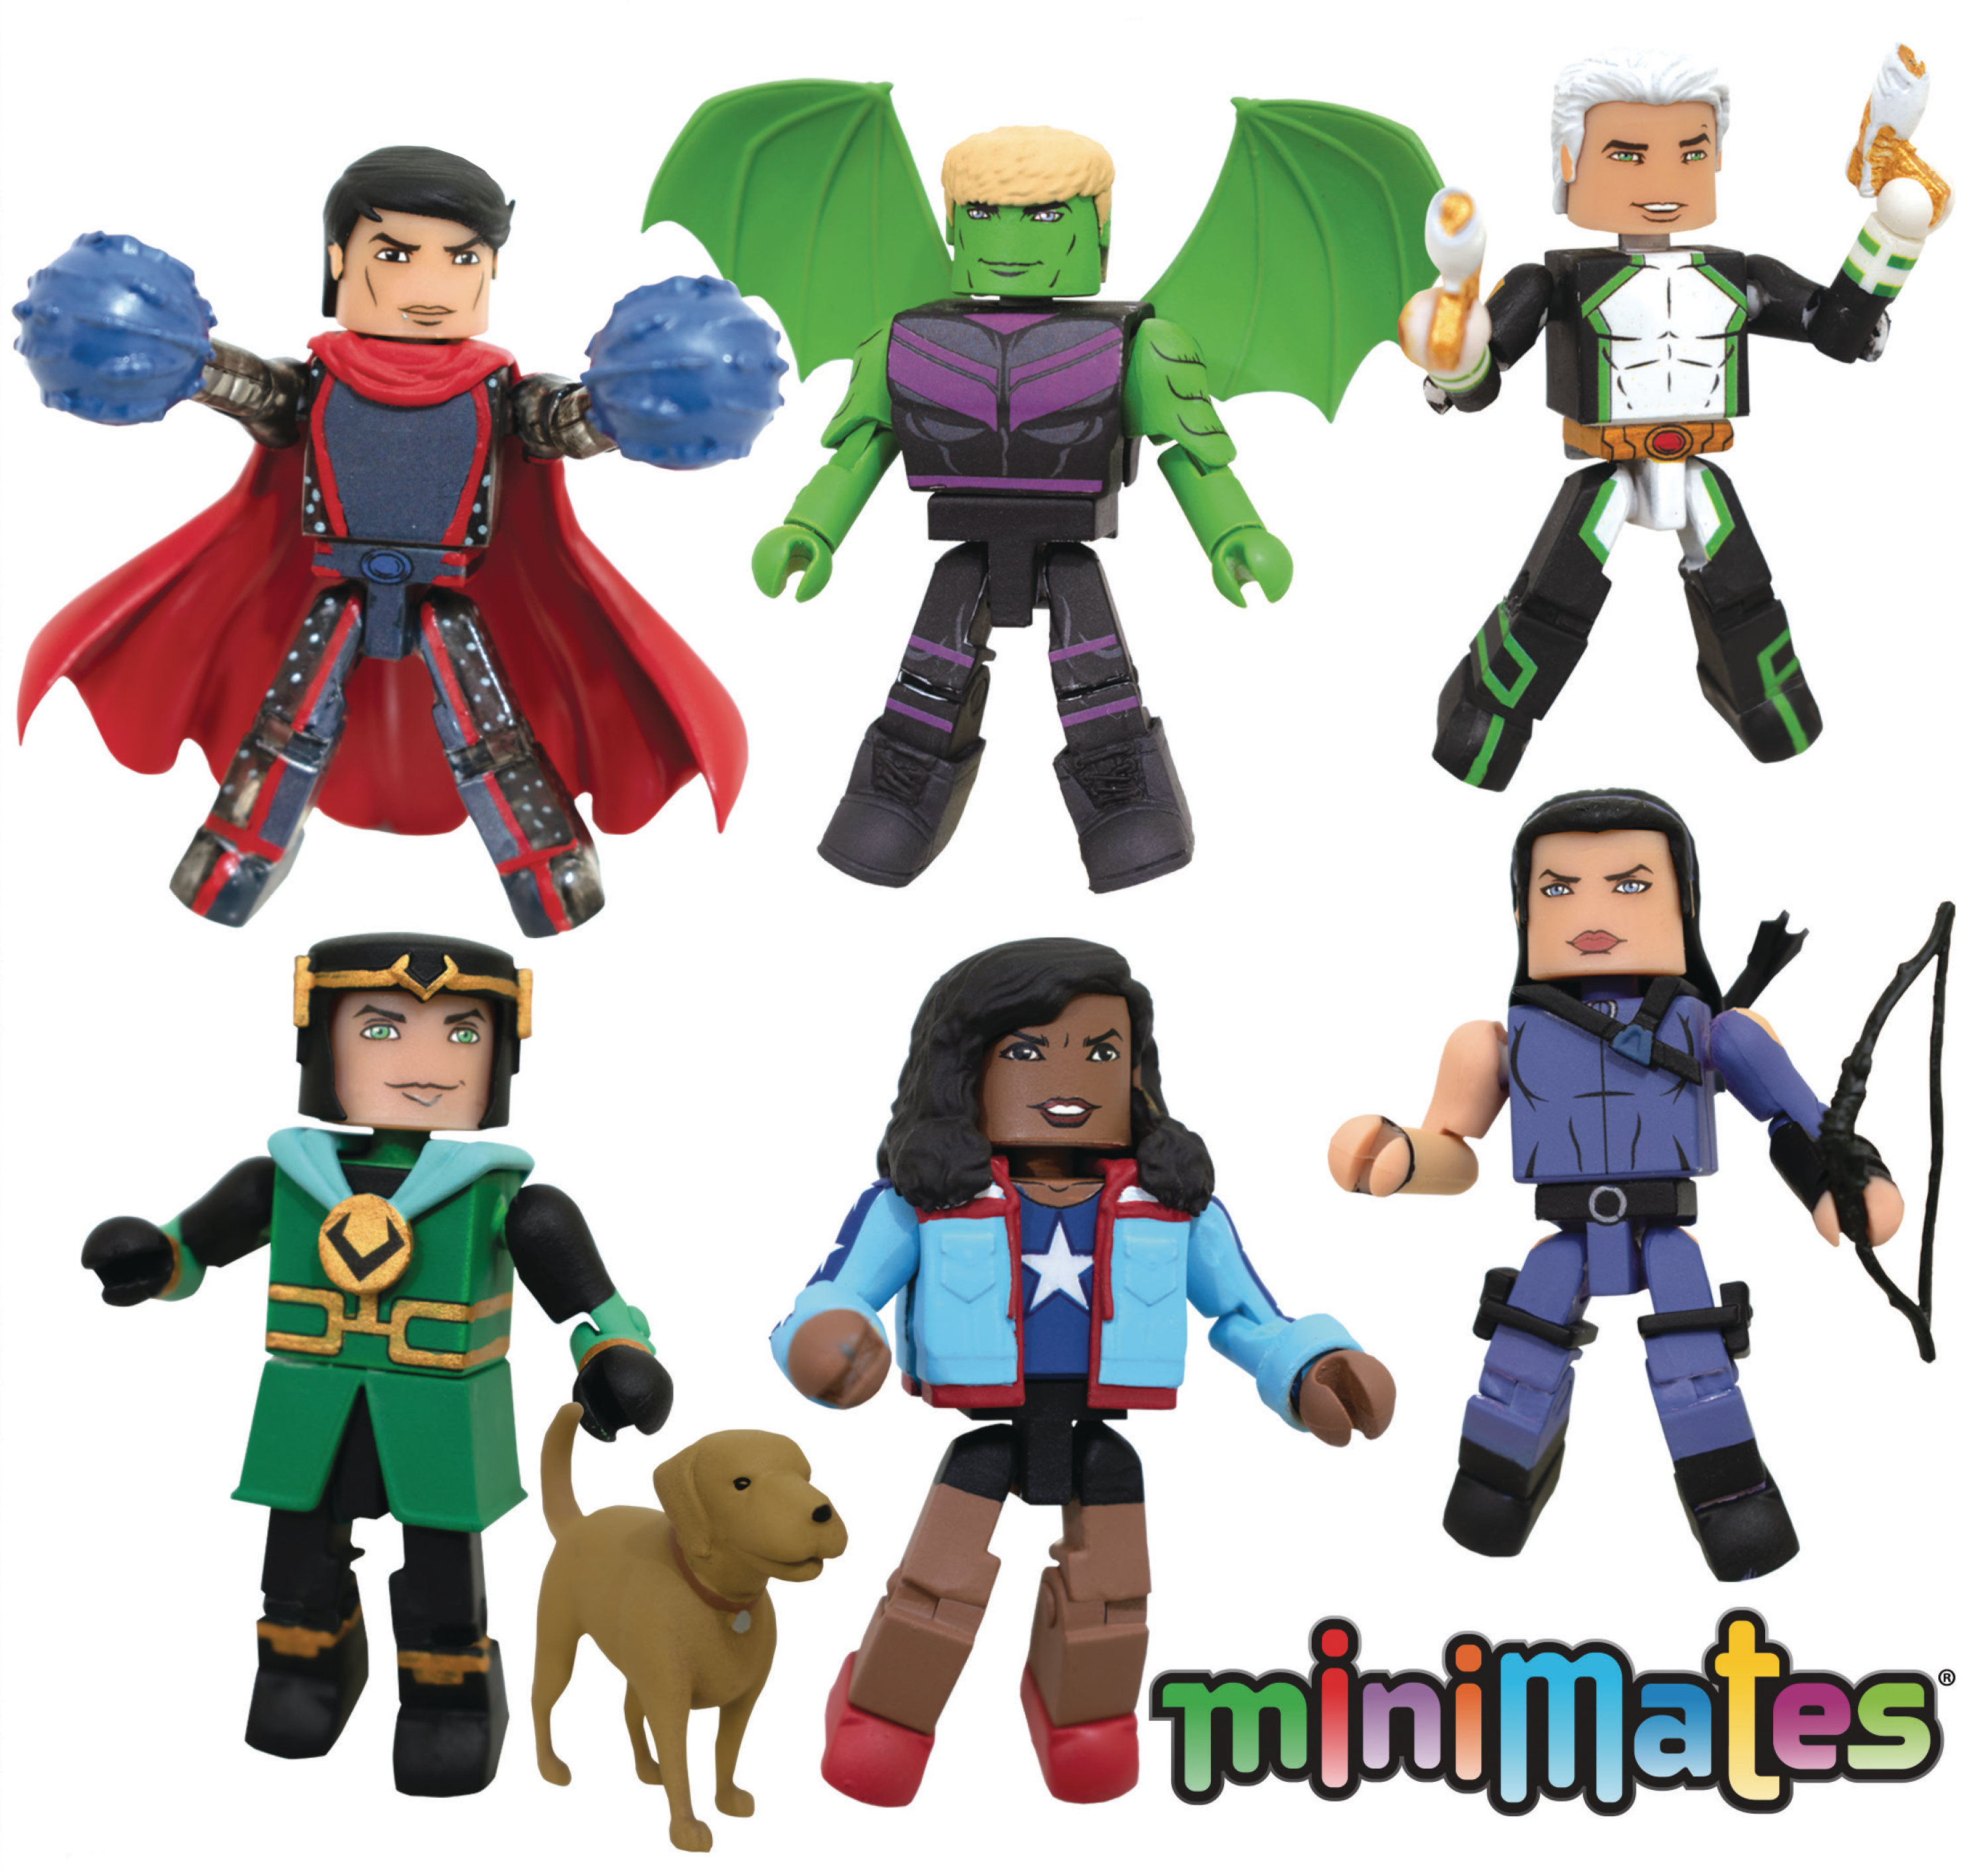 Marvel Minimates Young Avengers Deluxe Box